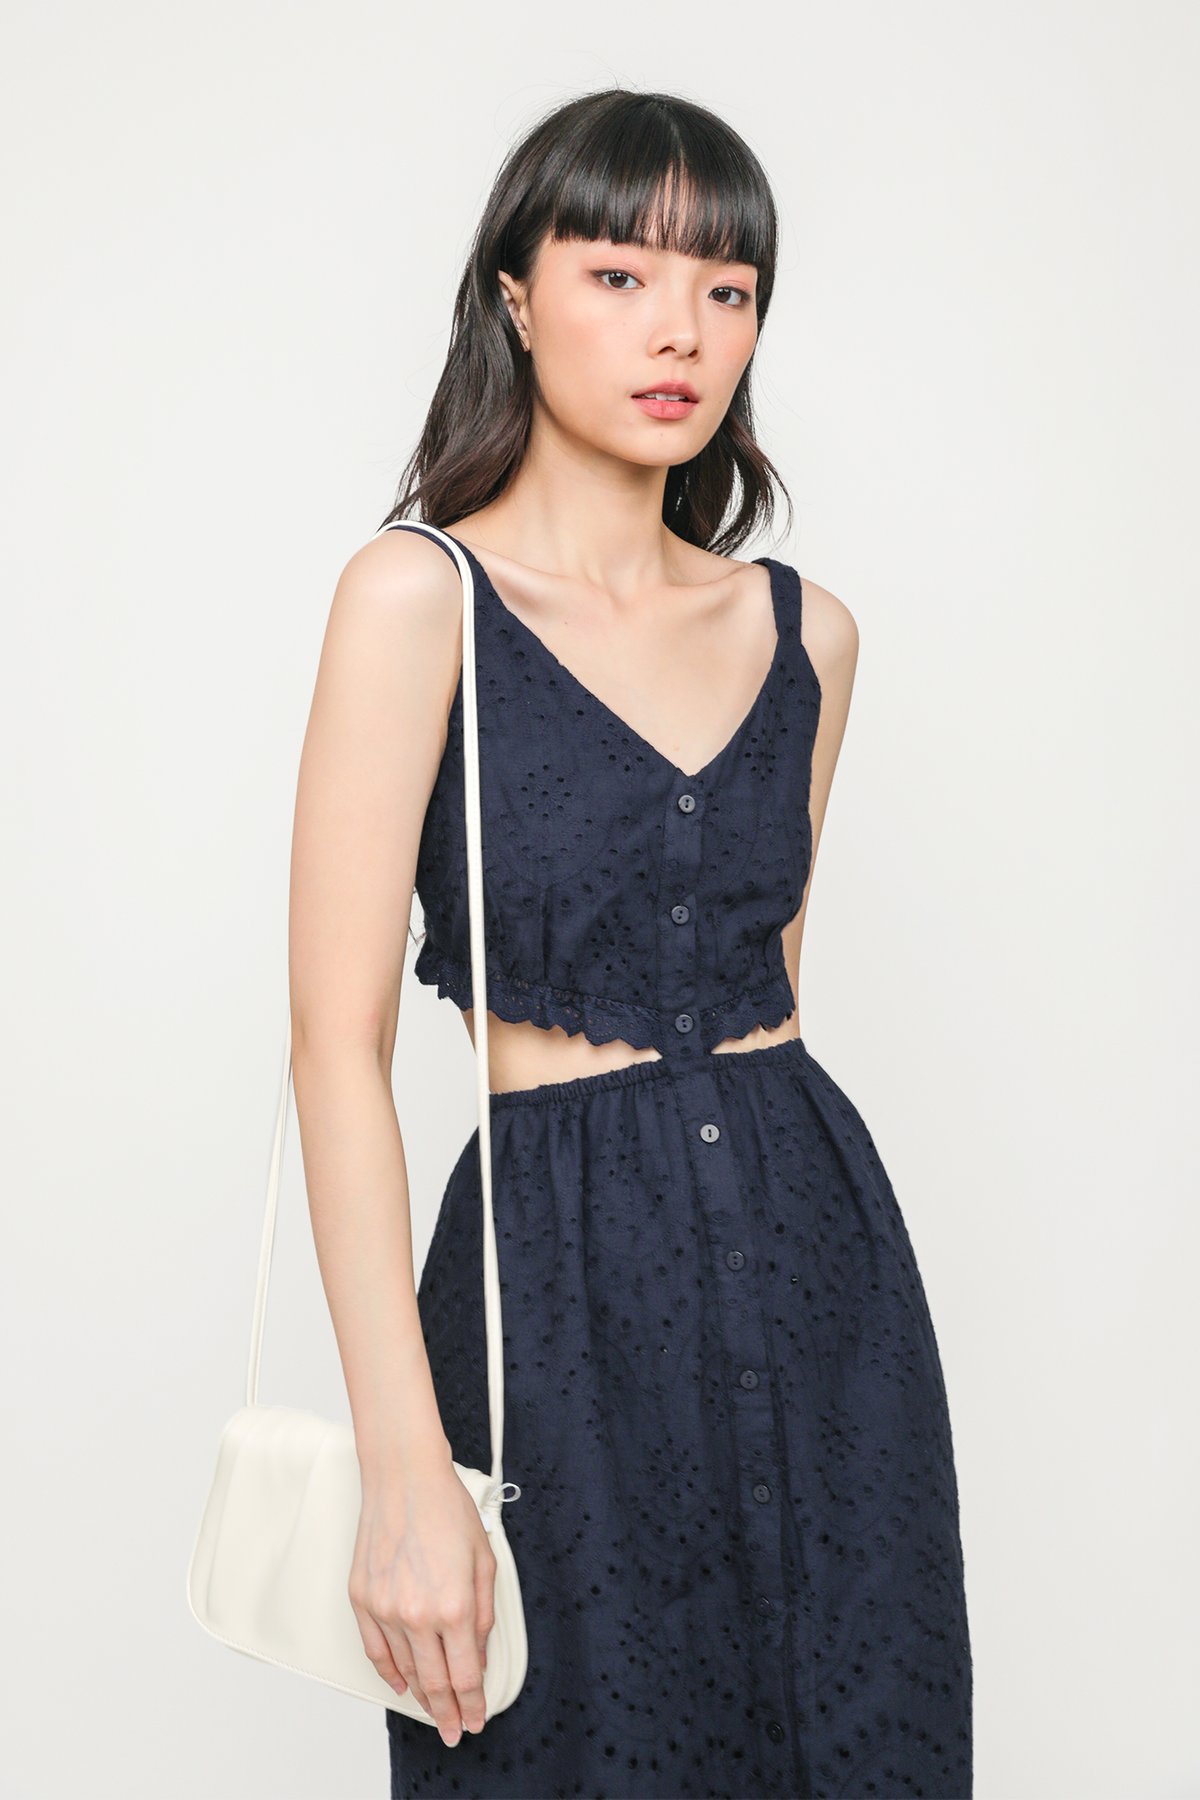 Serenity Eyelet Button Cut Out Dress (Navy)